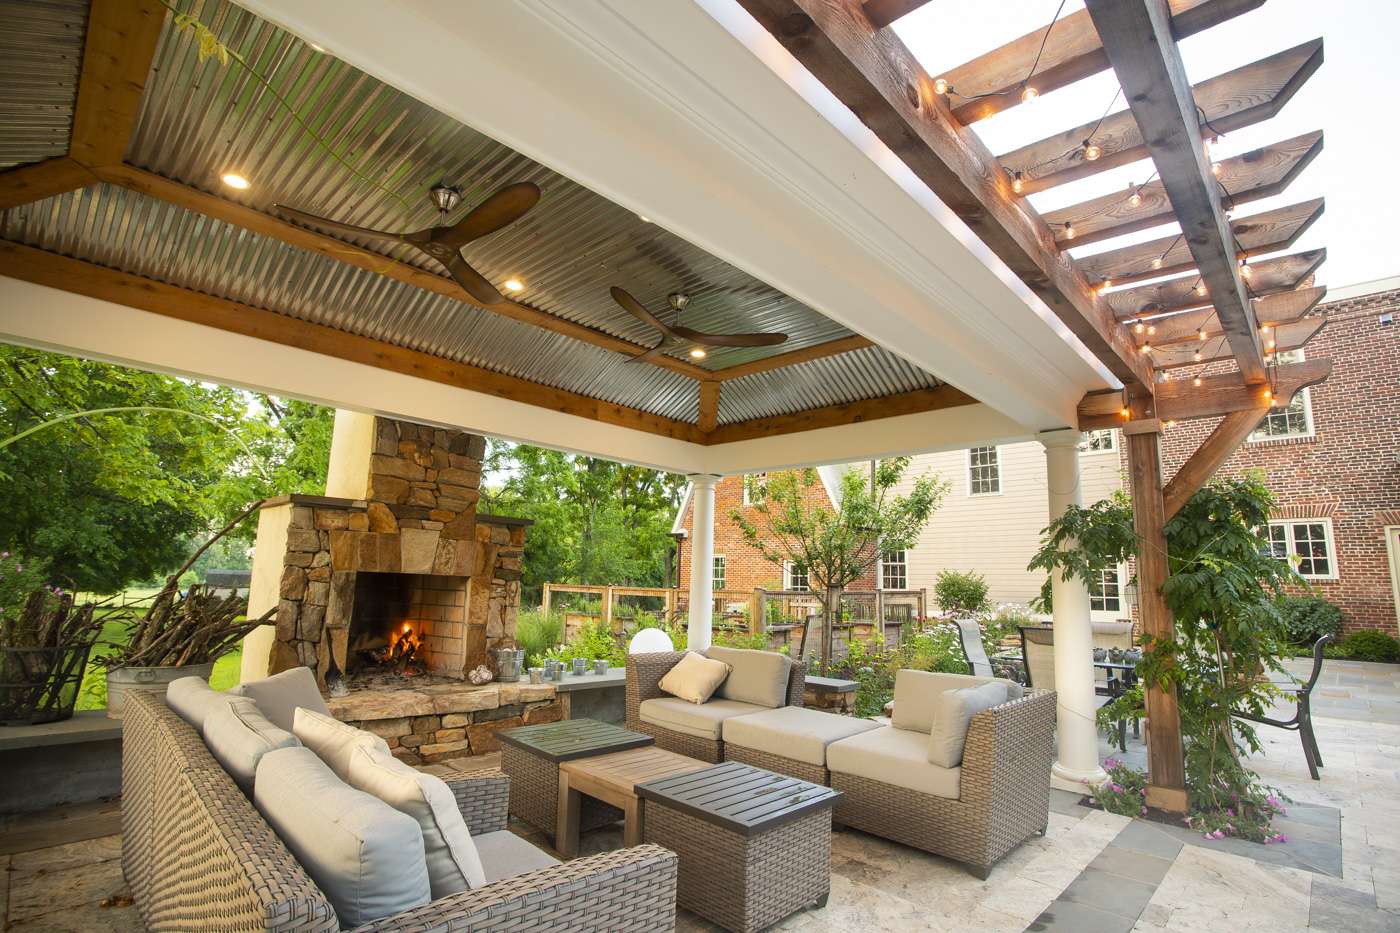 Combined Pergola and pavilion with outdoor fireplace